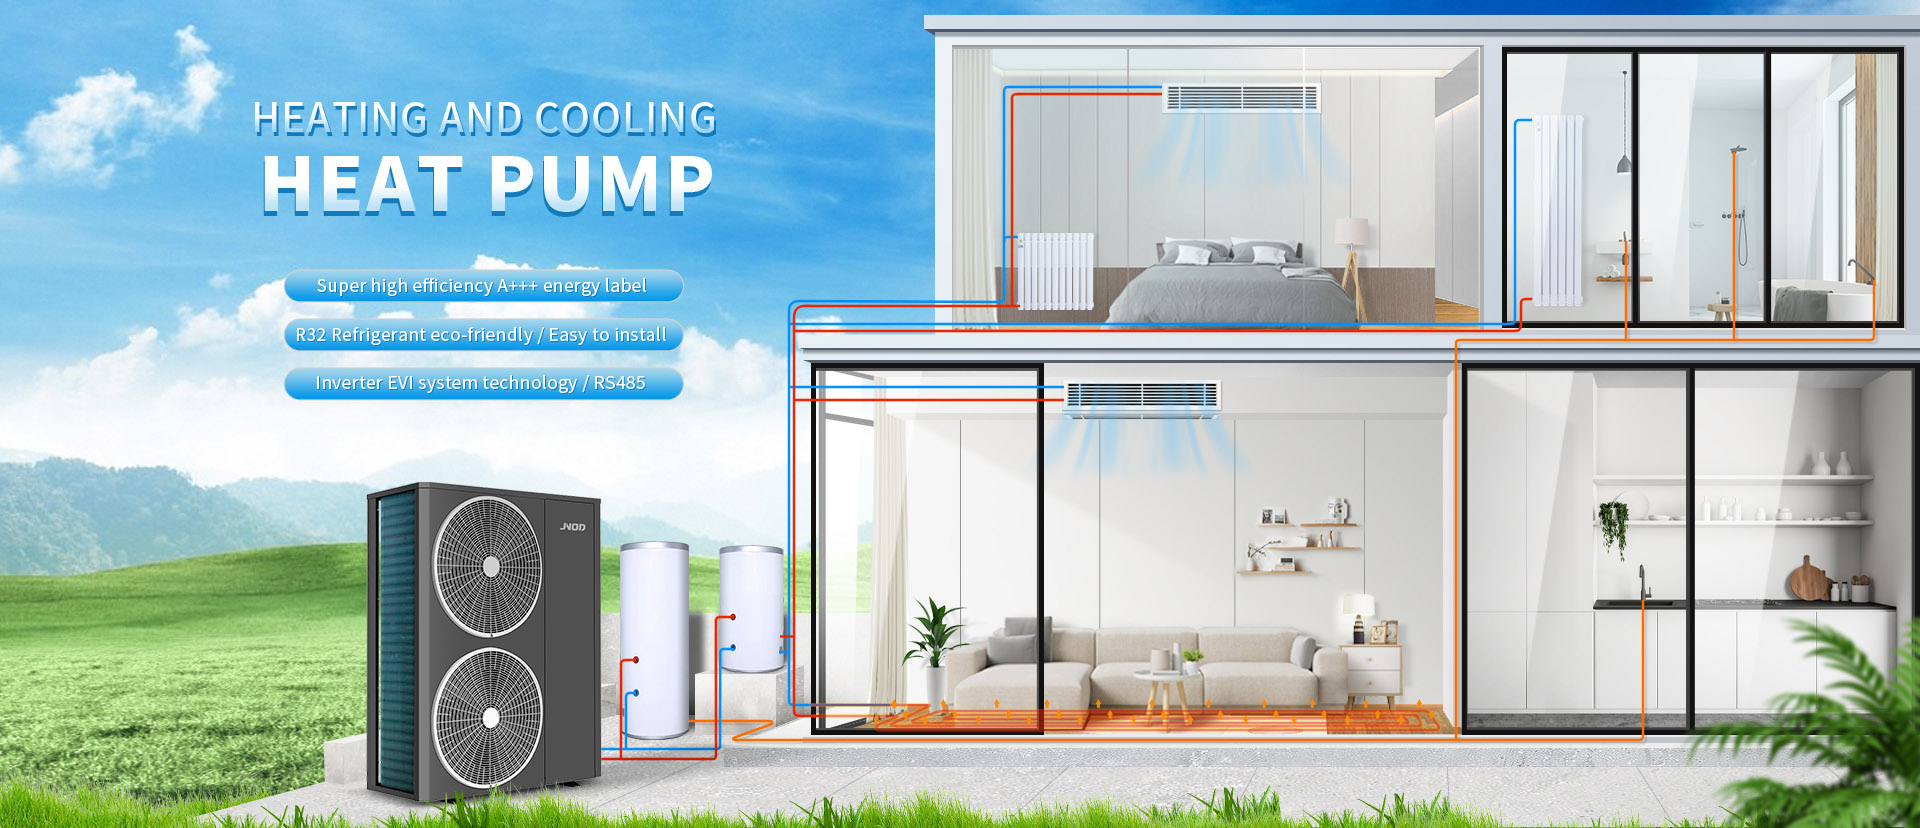 Heating And Cooling Heat Pump import